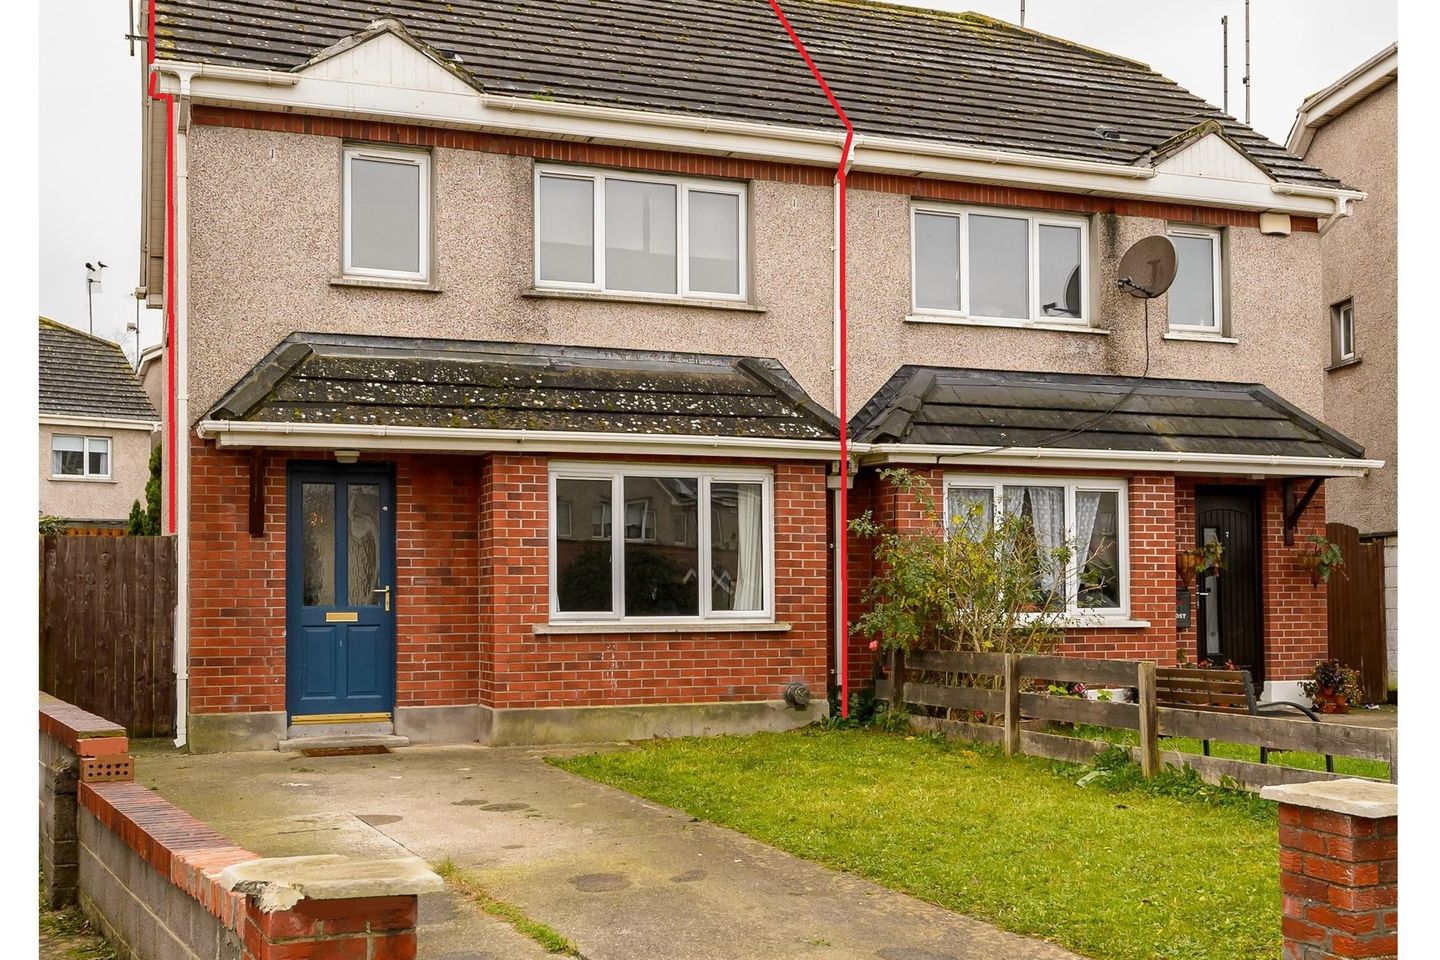 8 Cherrywood Close, Termon Abbey, Drogheda, Co. Louth